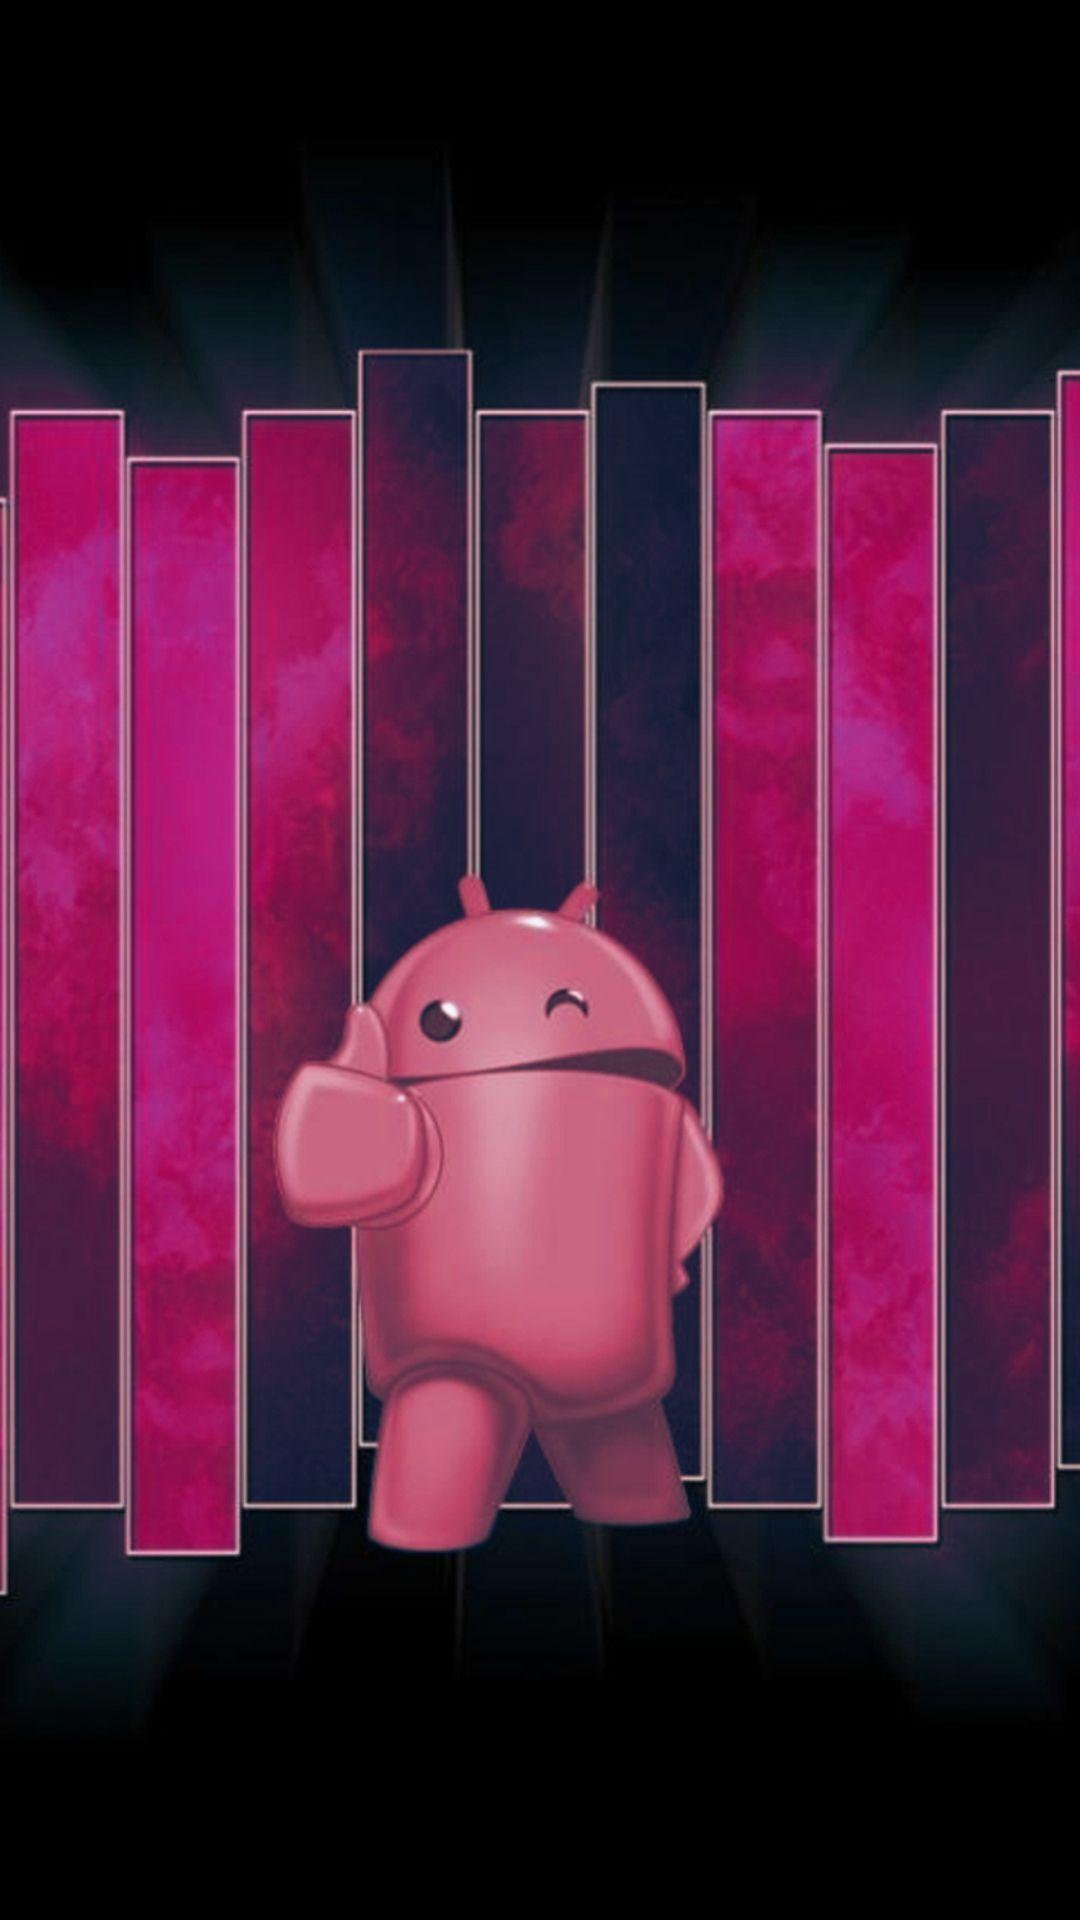 Android Thumbs Up Pink Smartphone Wallpaper HD ⋆ GetPhotos